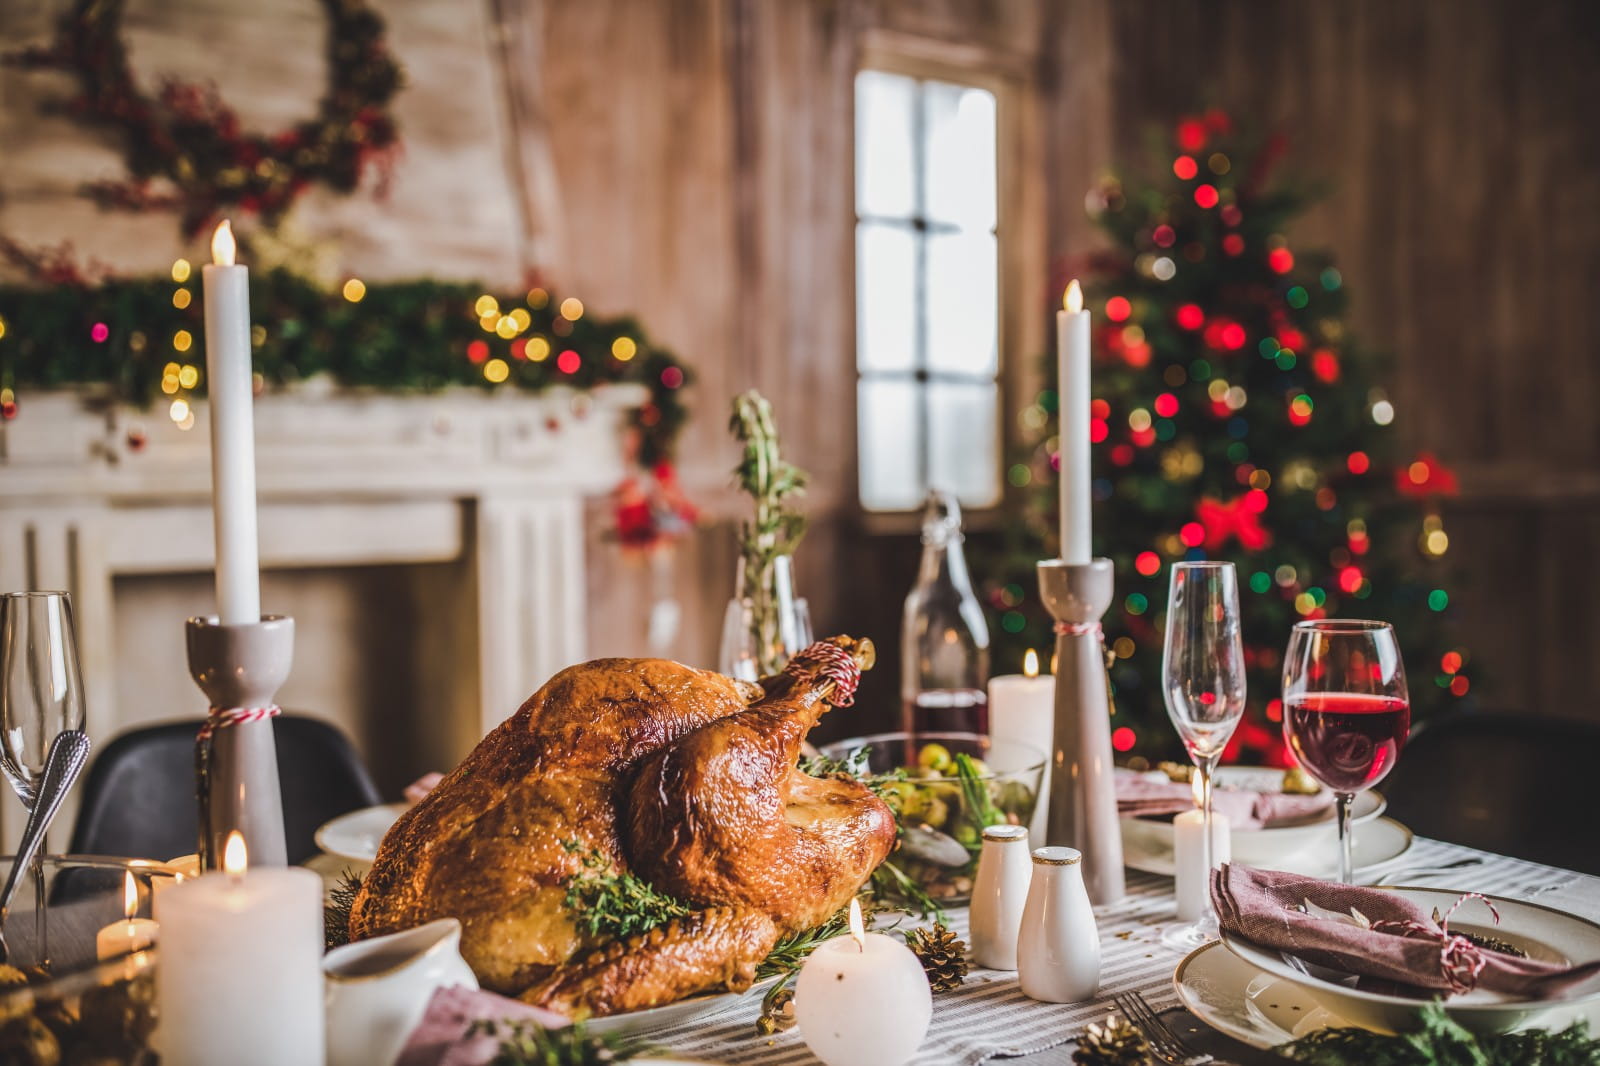 Planning ahead: The best wines to pair with your Christmas dinner 